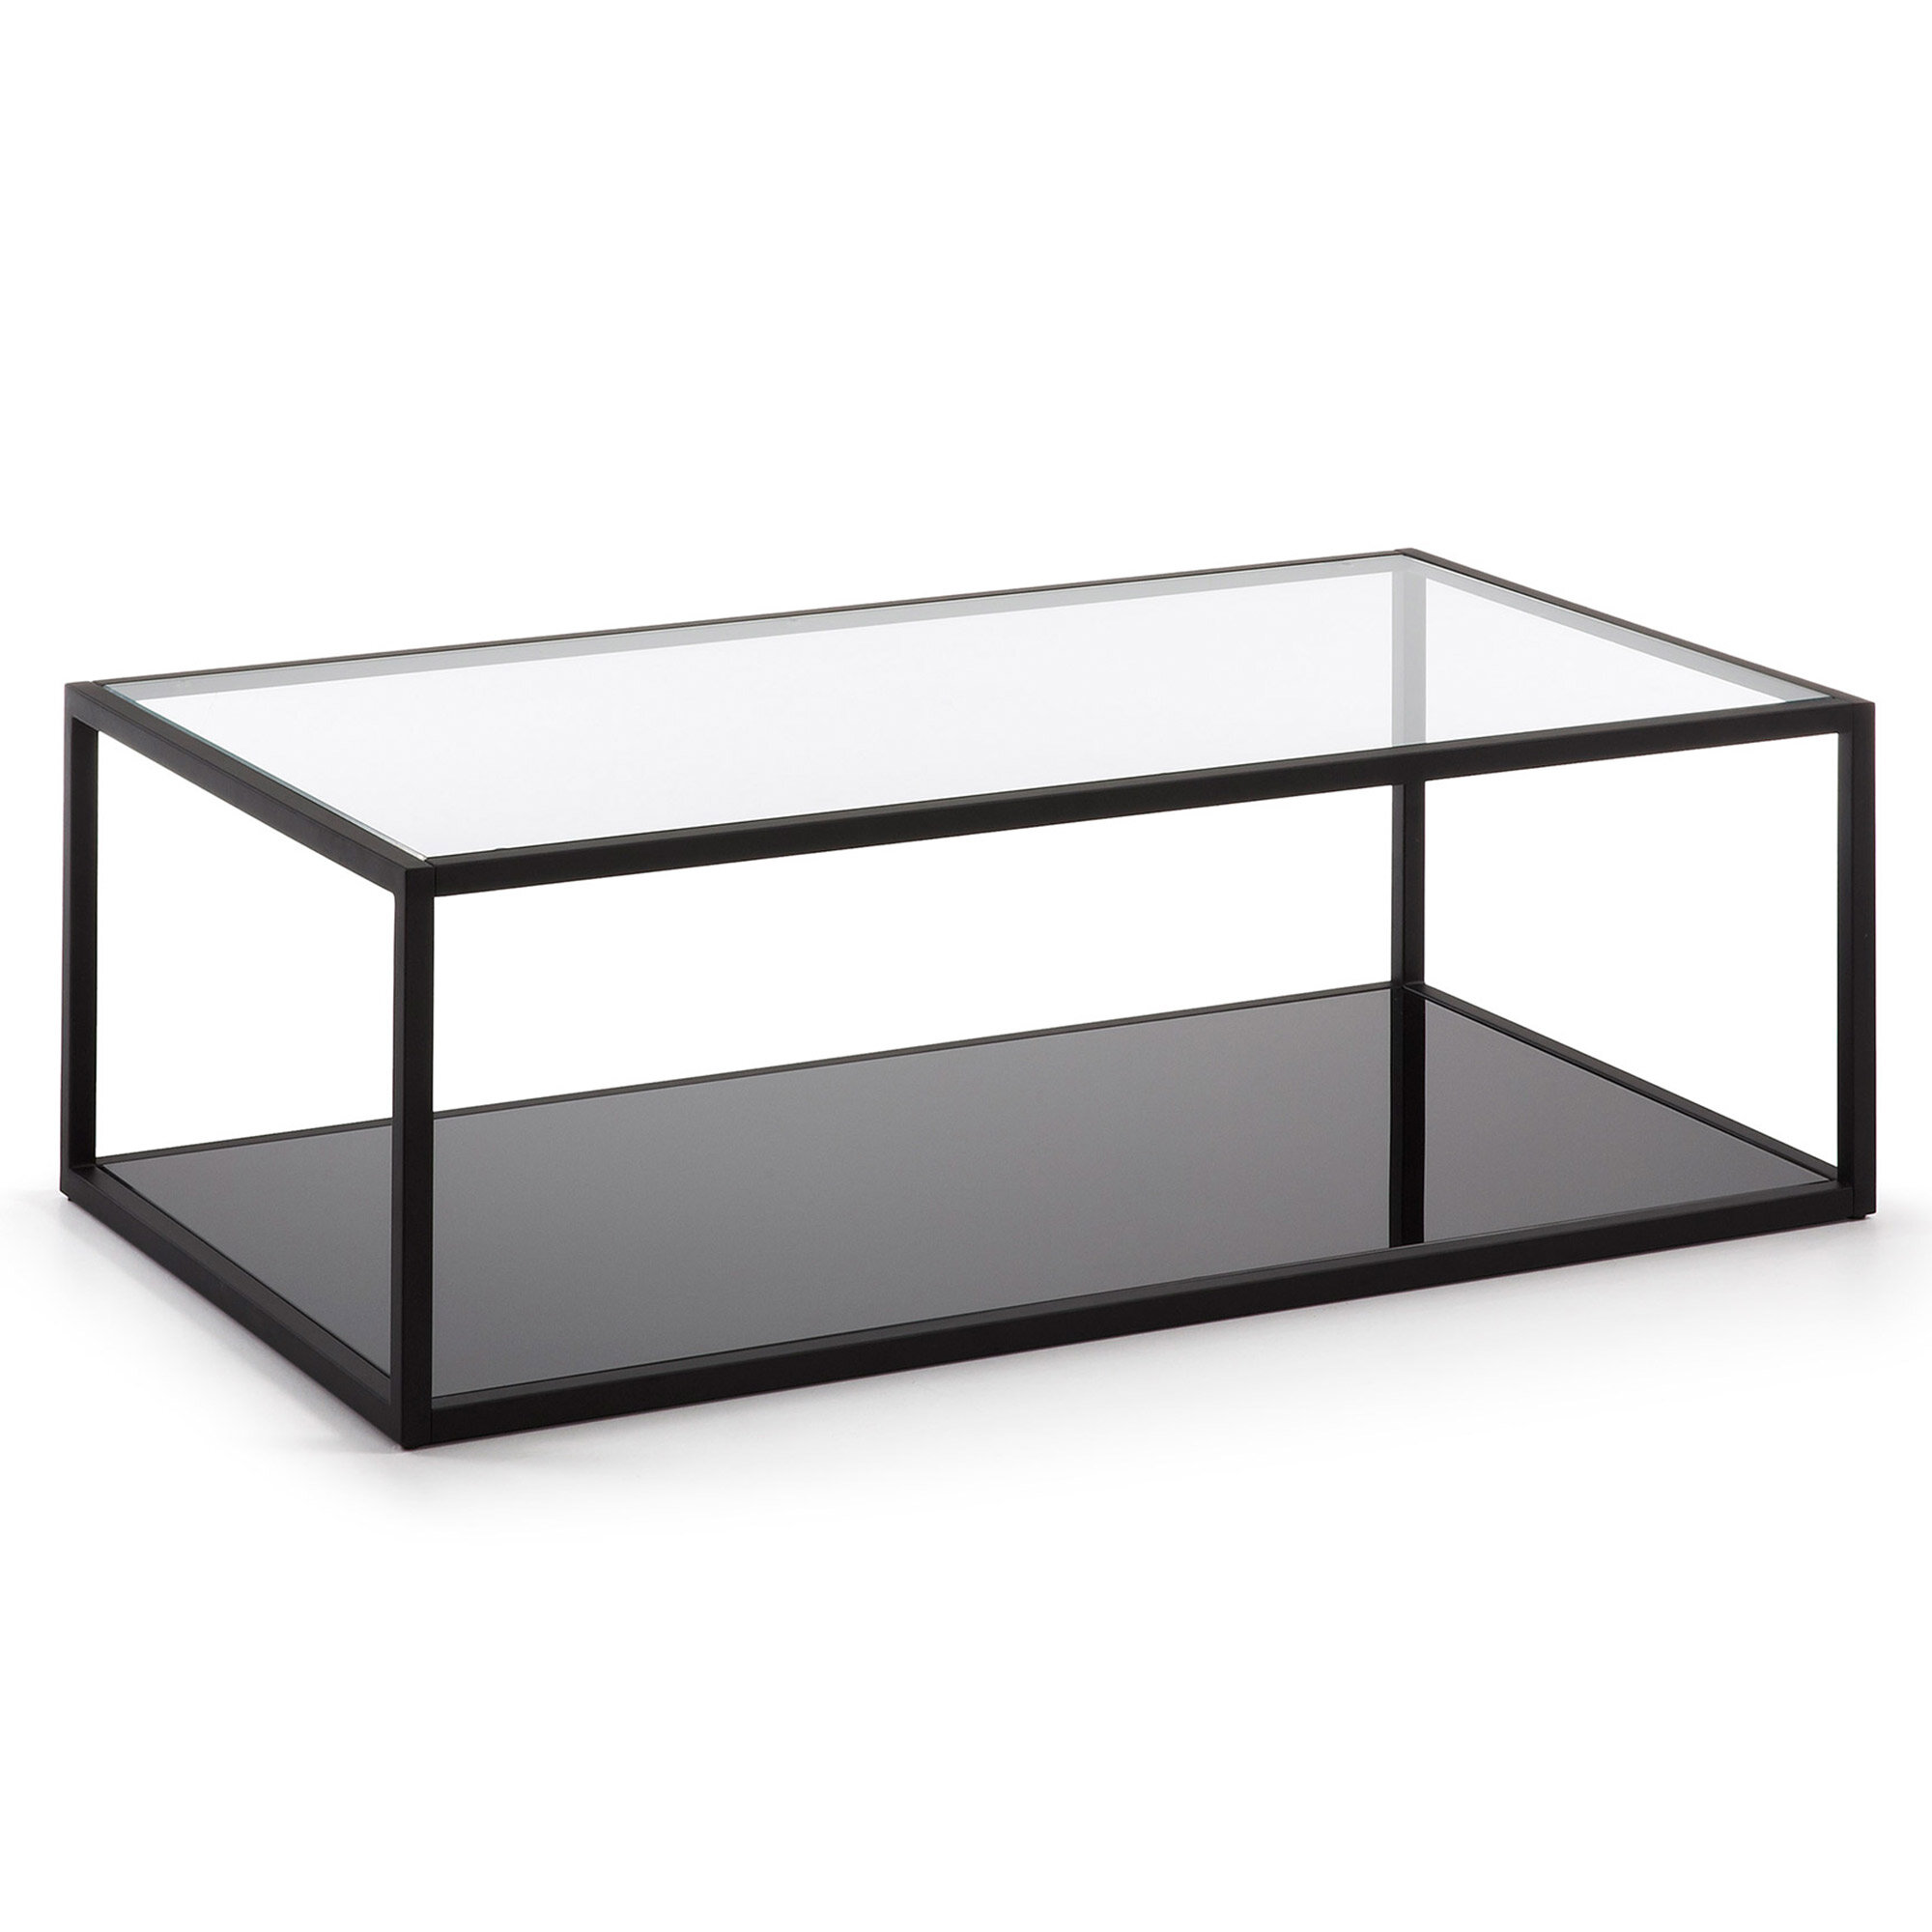 Hashtag Home Andarayan Coffee Table With Storage Reviews Wayfair Co Uk